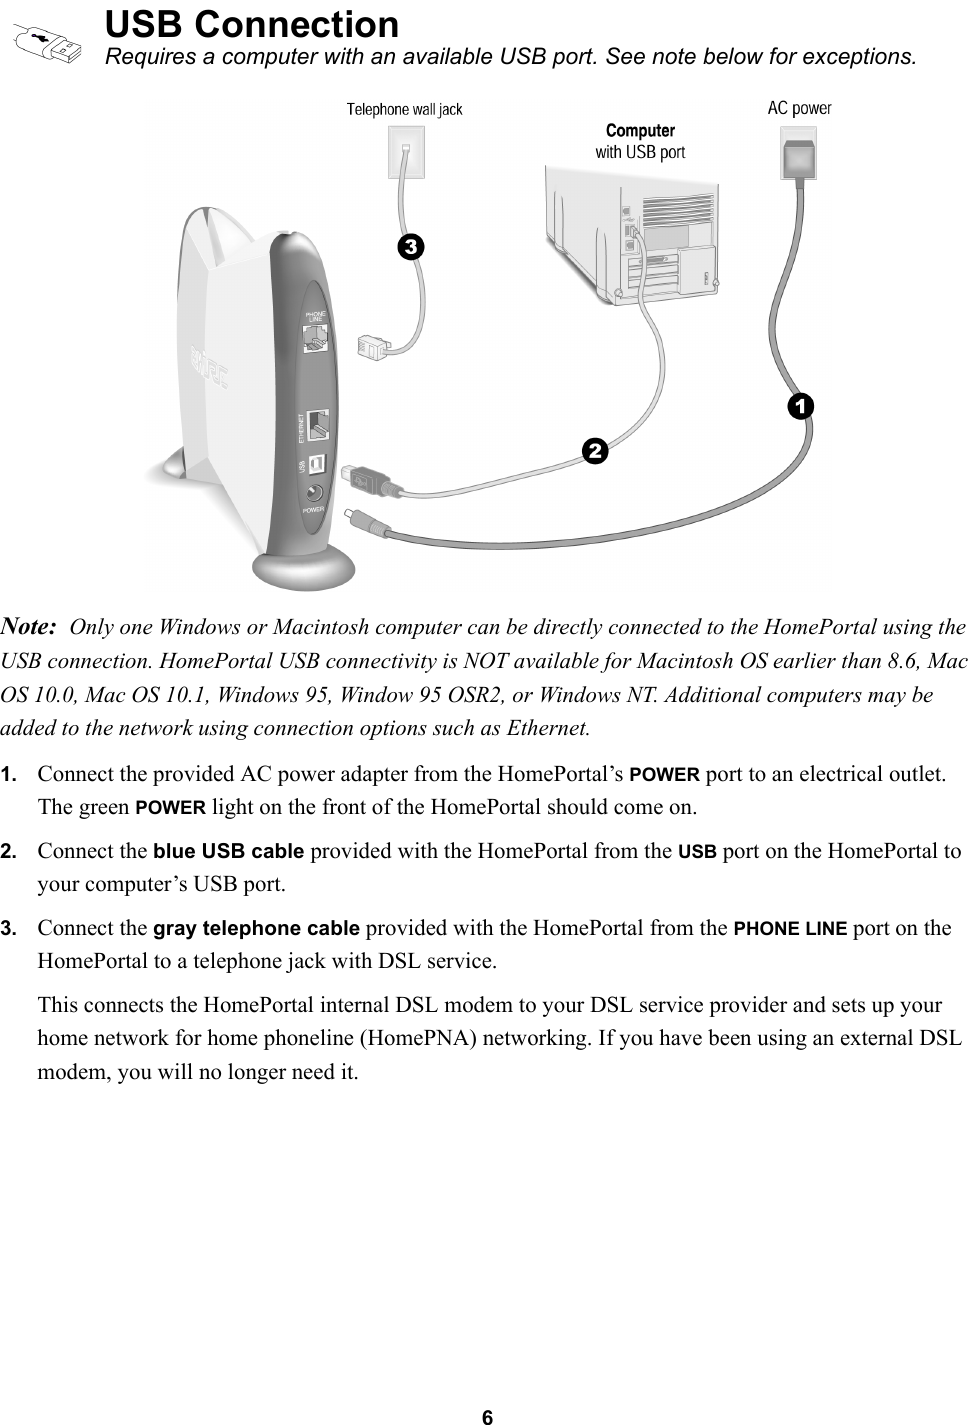 6Note: Only one Windows or Macintosh computer can be directly connected to the HomePortal using the USB connection. HomePortal USB connectivity is NOT available for Macintosh OS earlier than 8.6, Mac OS 10.0, Mac OS 10.1, Windows 95, Window 95 OSR2, or Windows NT. Additional computers may be added to the network using connection options such as Ethernet.1. Connect the provided AC power adapter from the HomePortal’s POWER port to an electrical outlet. The green POWER light on the front of the HomePortal should come on.2. Connect the blue USB cable provided with the HomePortal from the USB port on the HomePortal to your computer’s USB port.3. Connect the gray telephone cable provided with the HomePortal from the PHONE LINE port on the HomePortal to a telephone jack with DSL service. This connects the HomePortal internal DSL modem to your DSL service provider and sets up your home network for home phoneline (HomePNA) networking. If you have been using an external DSL modem, you will no longer need it.USB ConnectionRequires a computer with an available USB port. See note below for exceptions.